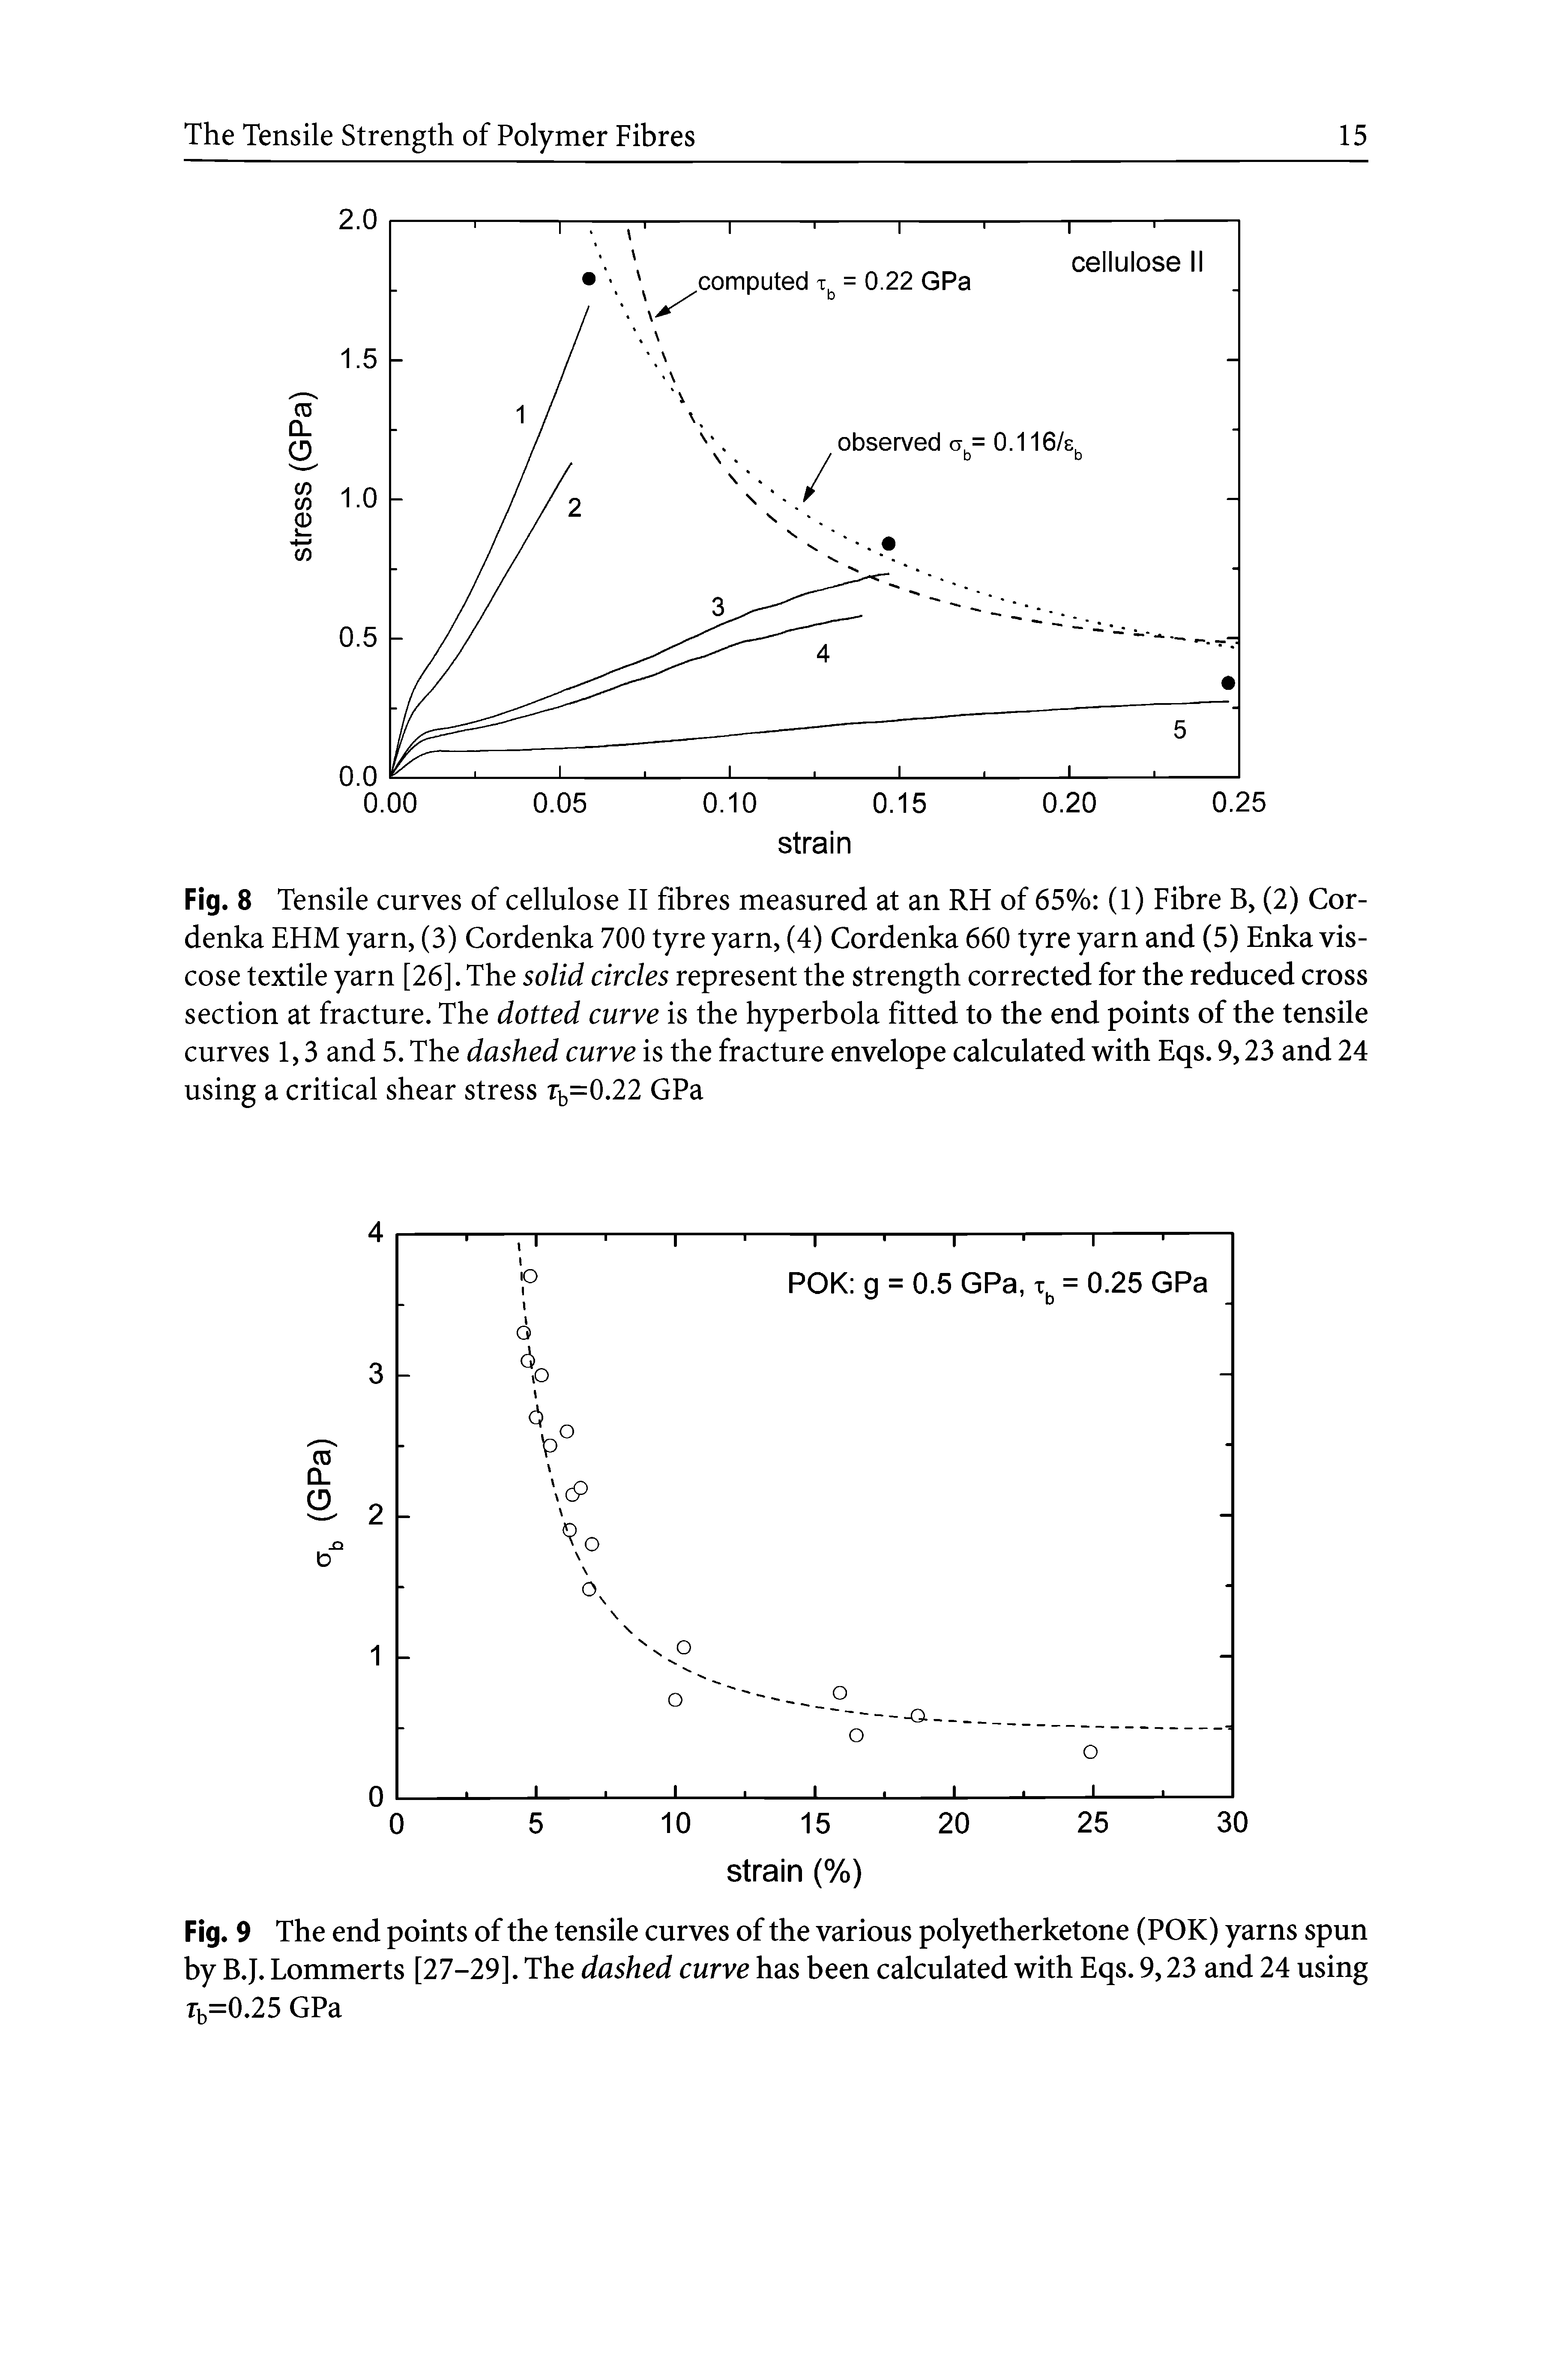 Fig. 9 The end points of the tensile curves of the various polyetherketone (POK) yarns spun by B.J. Lommerts [27-29]. The dashed curve has been calculated with Eqs. 9,23 and 24 using rb=0.25 GPa...